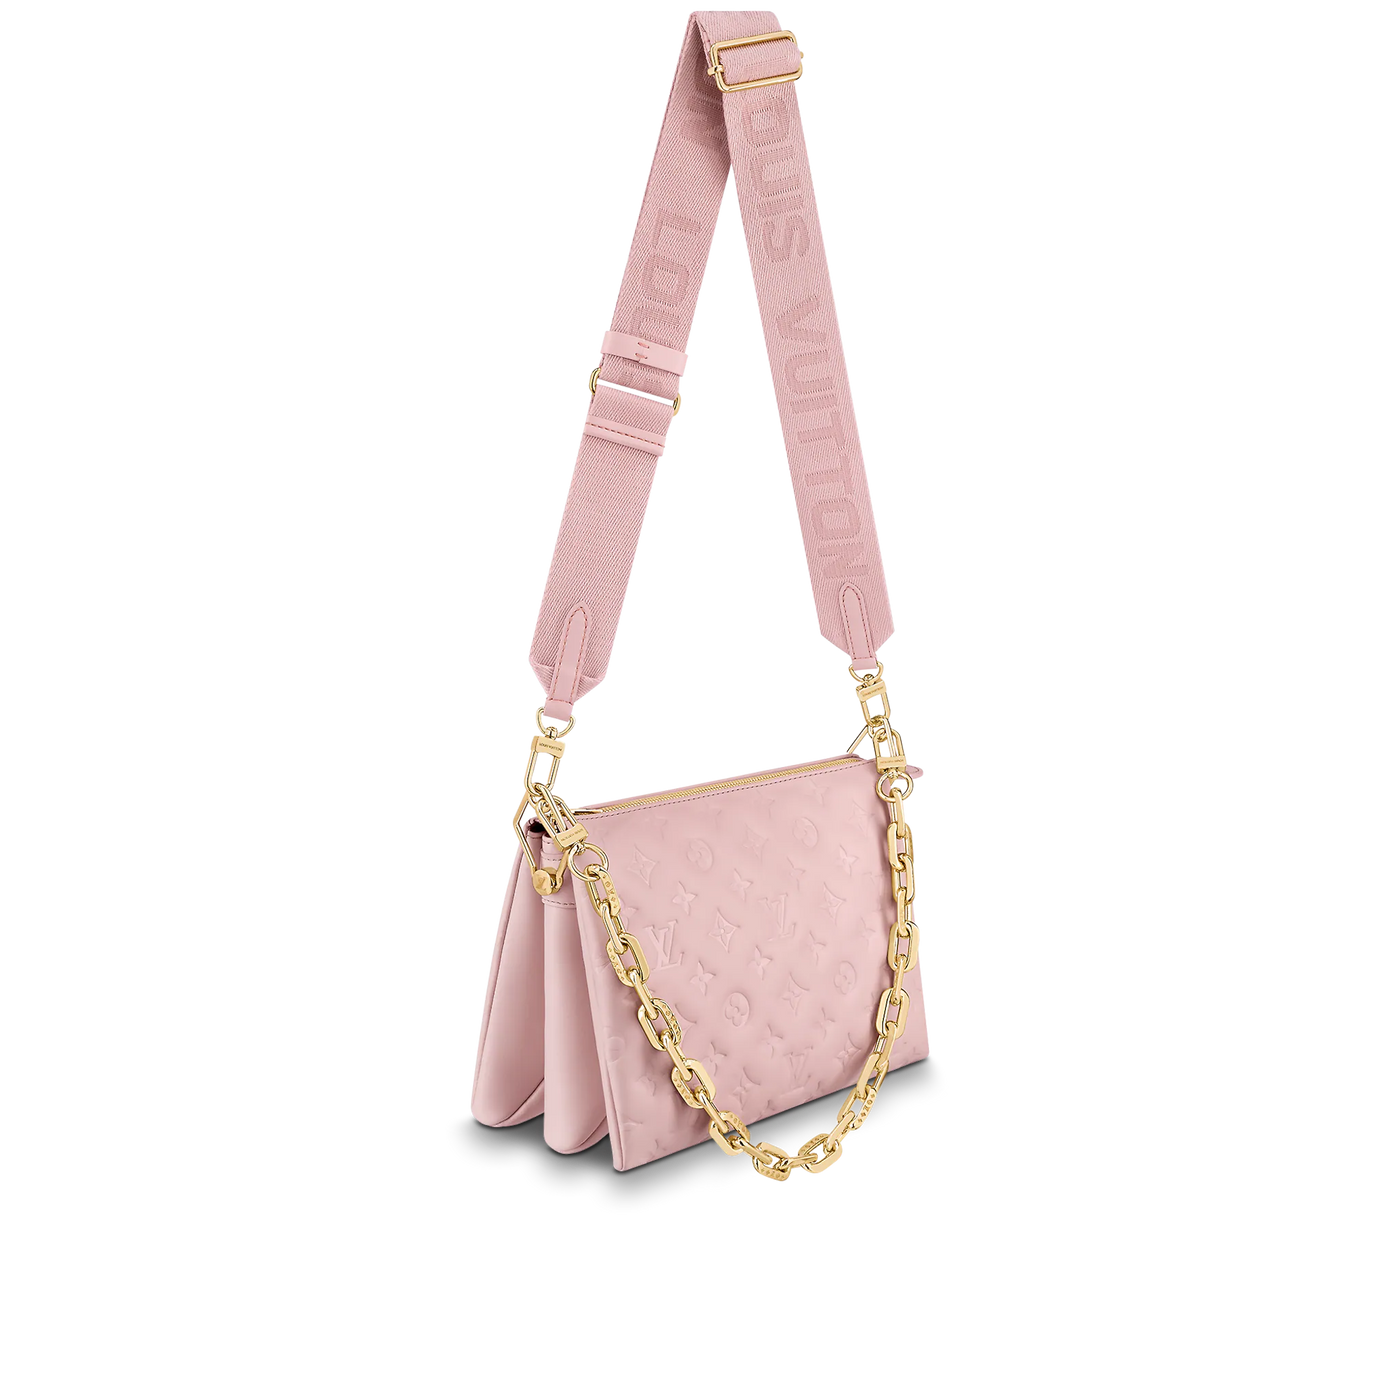 Louis Vuitton M22395 Coussin PM, Pink, One Size